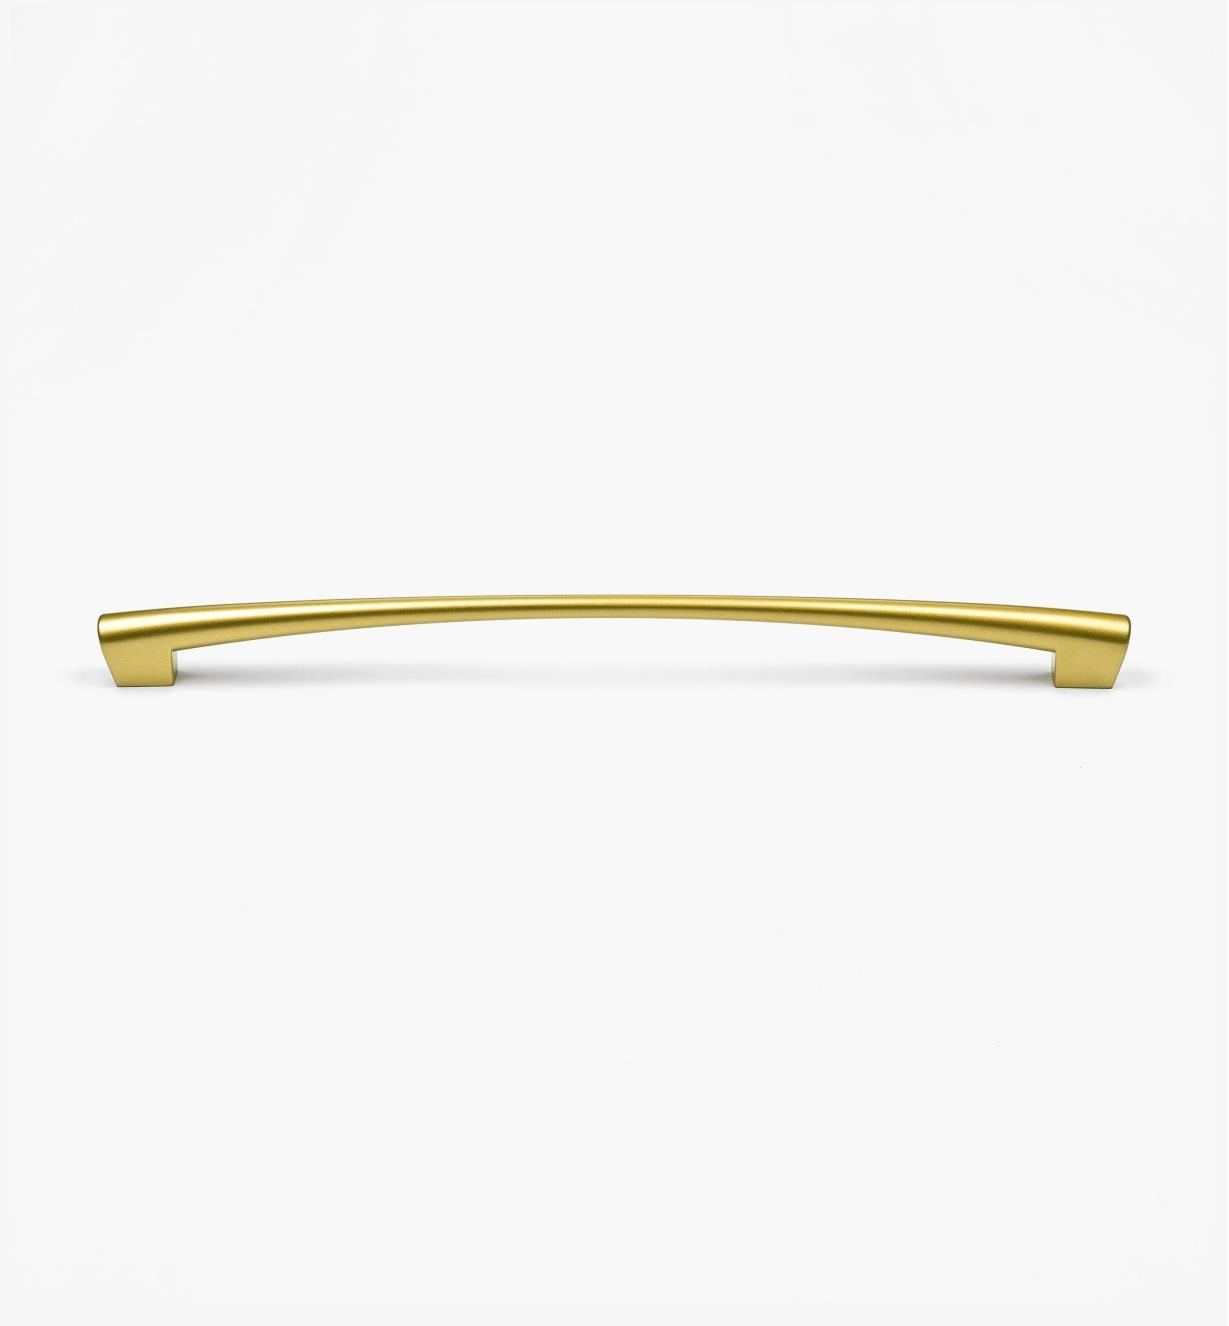 00A2918 - 320mm × 33mm Gold Nautilus Handle